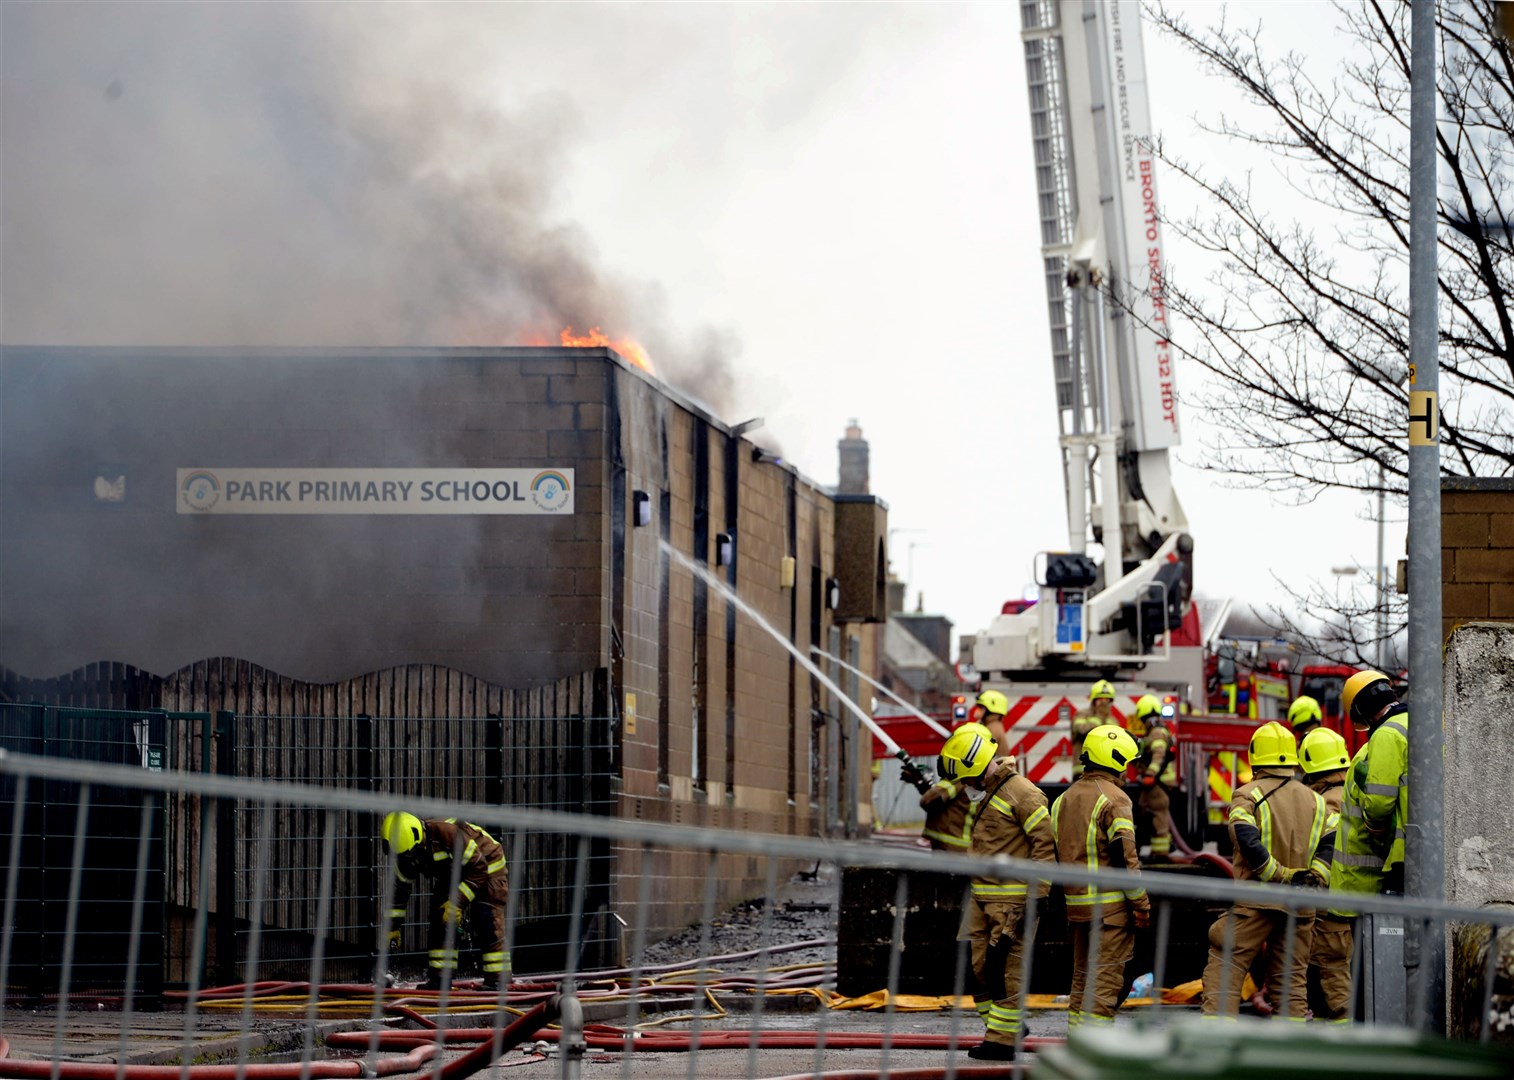 The Park Primary School fire won't be forgotten any time soon. Picture: James MacKenzie